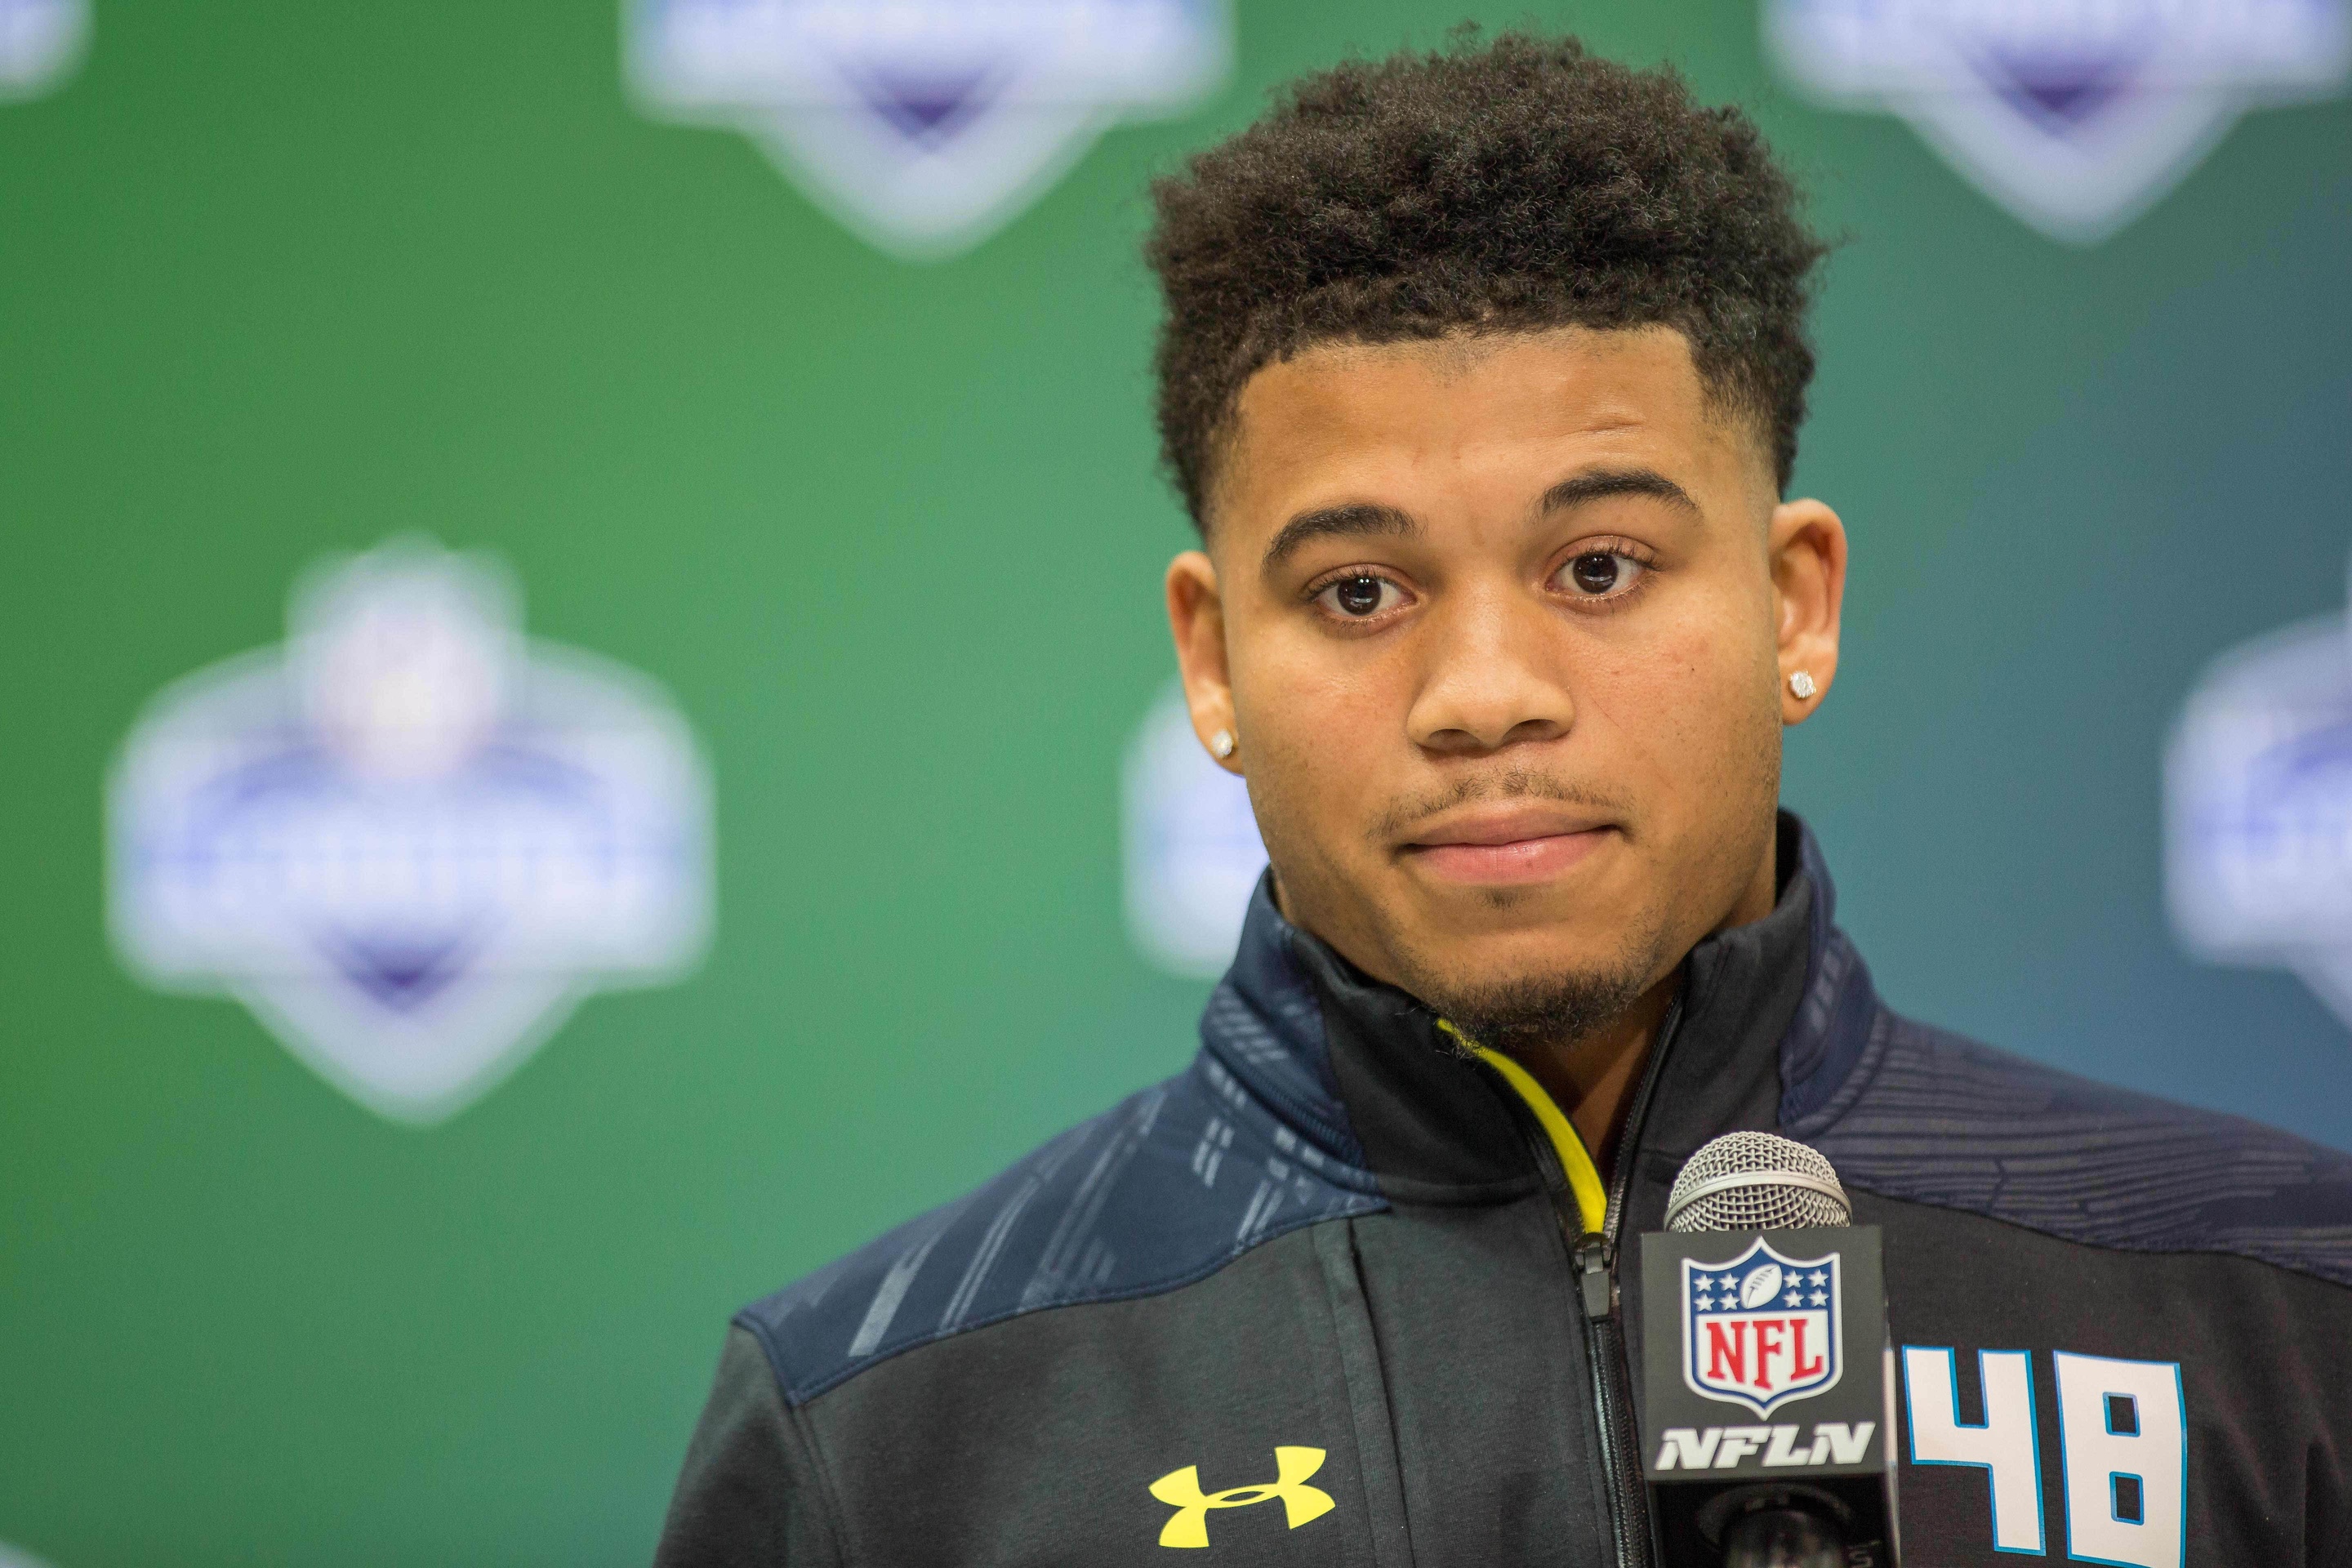 Mar 5, 2017; Indianapolis, IN, USA; Florida Gators defensive back Teez Tabor speaks to the media during the 2017 combine at Indiana Convention Center. Mandatory Credit: Trevor Ruszkowski-USA TODAY Sports